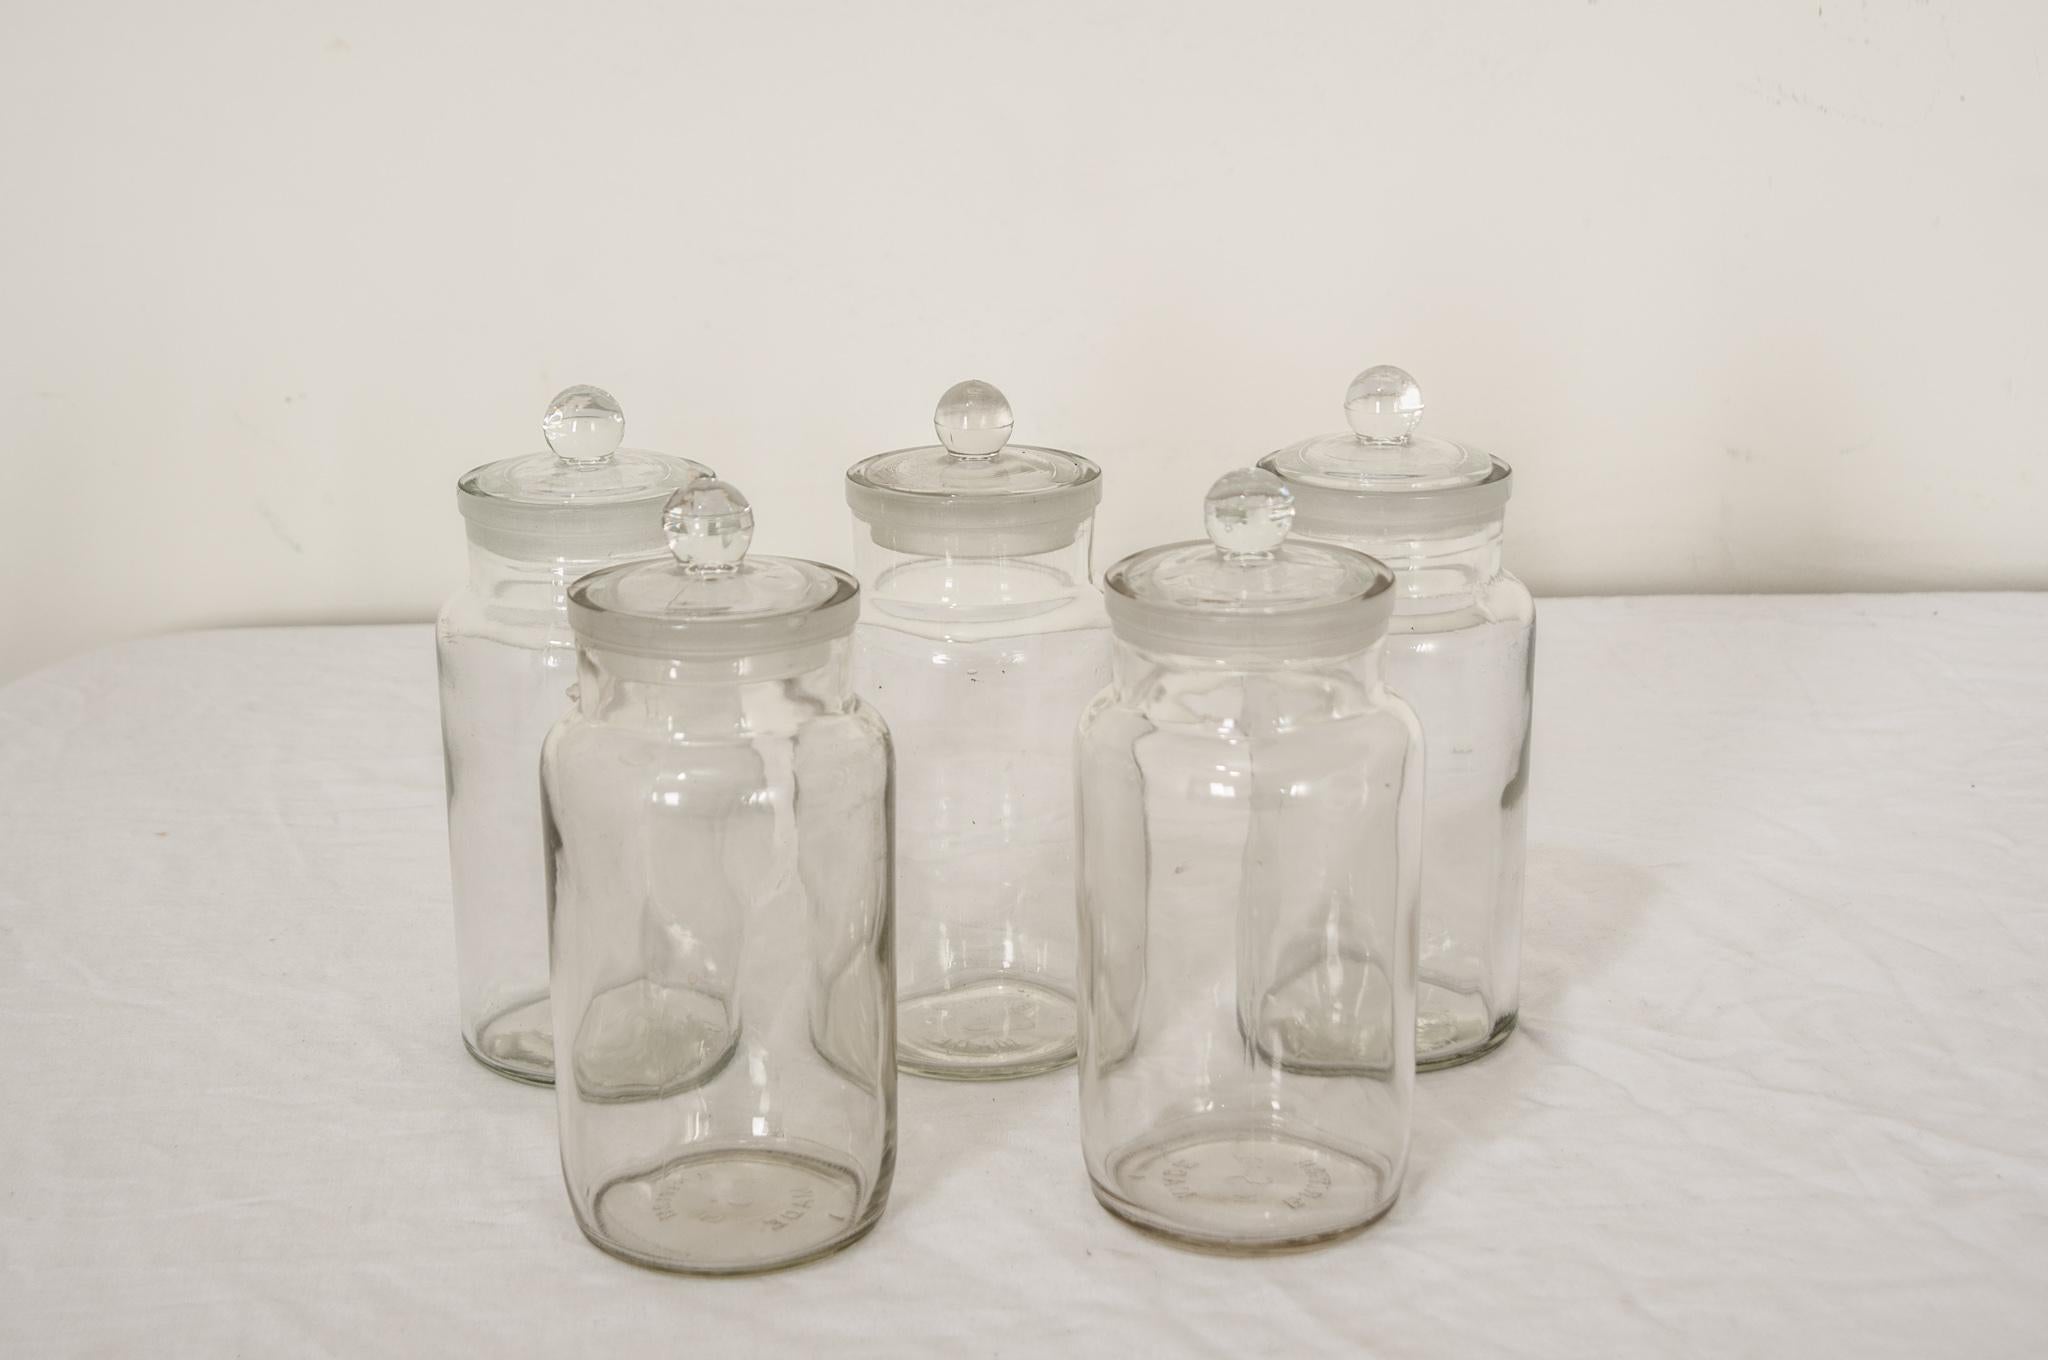 A set of five glass apothecary jars with ball lids, hand-blown in England. Marked by the glassmaker on the bottom with “British S Made”. The antique look of these clear glass apothecary jars make them a beautiful accent in their own right, or an